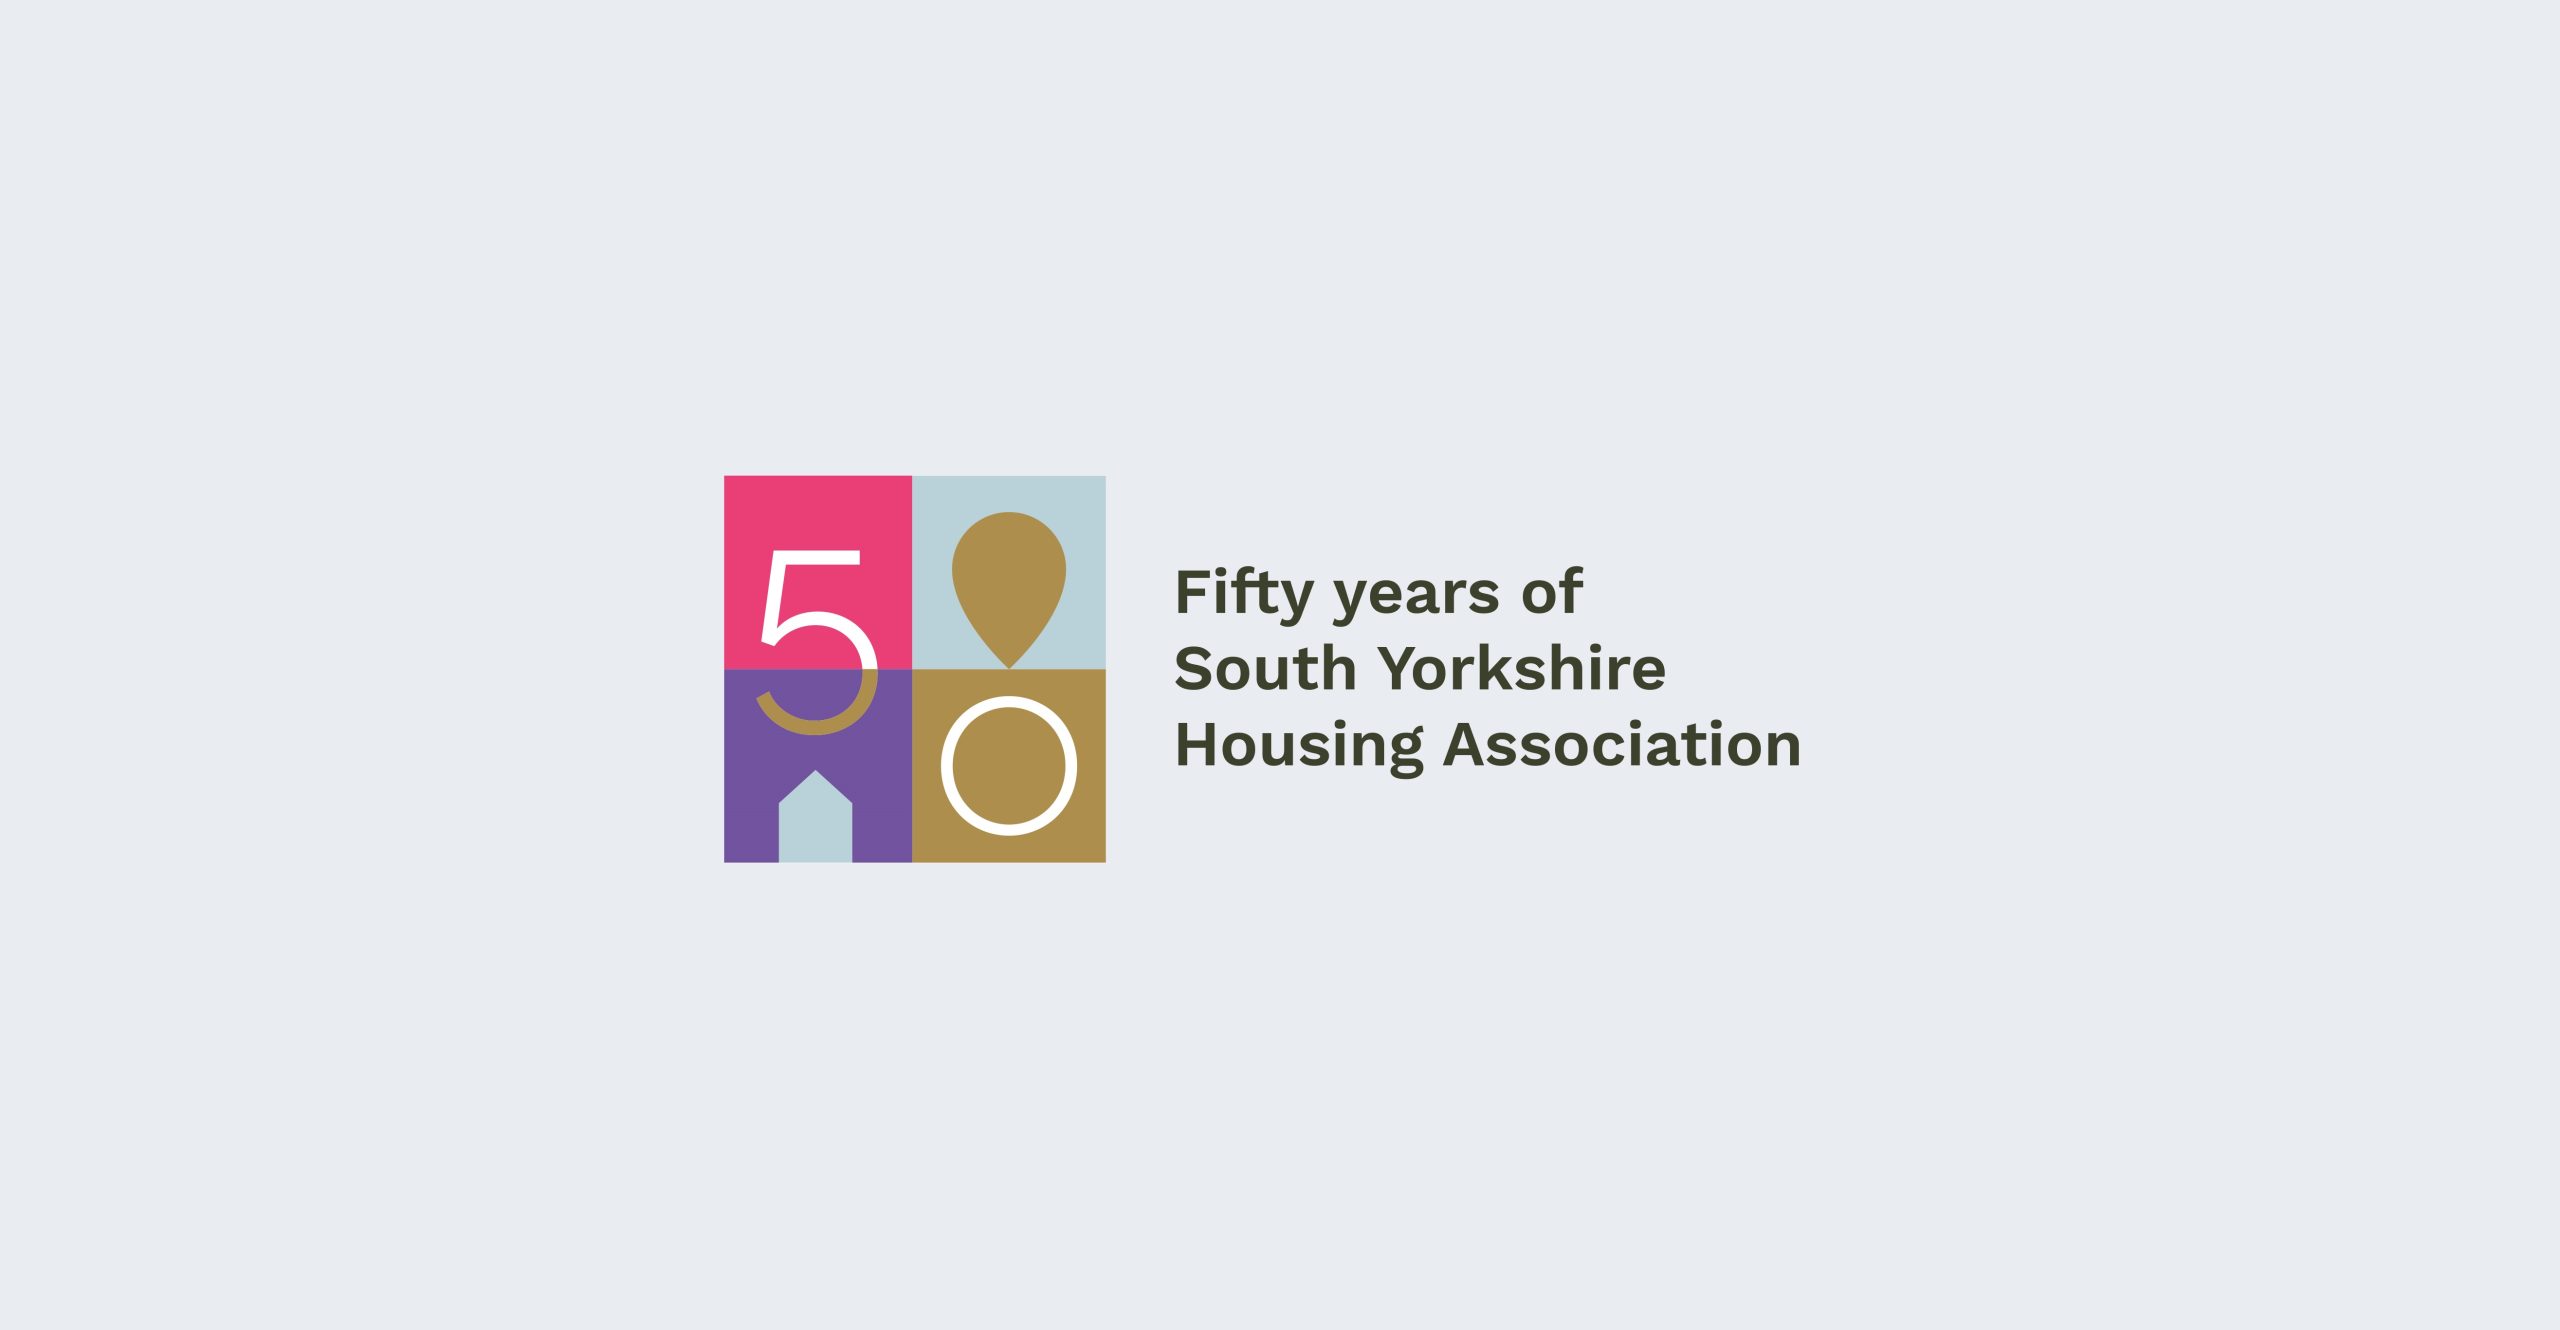 2022 marks 50 years of South Yorkshire Housing Association